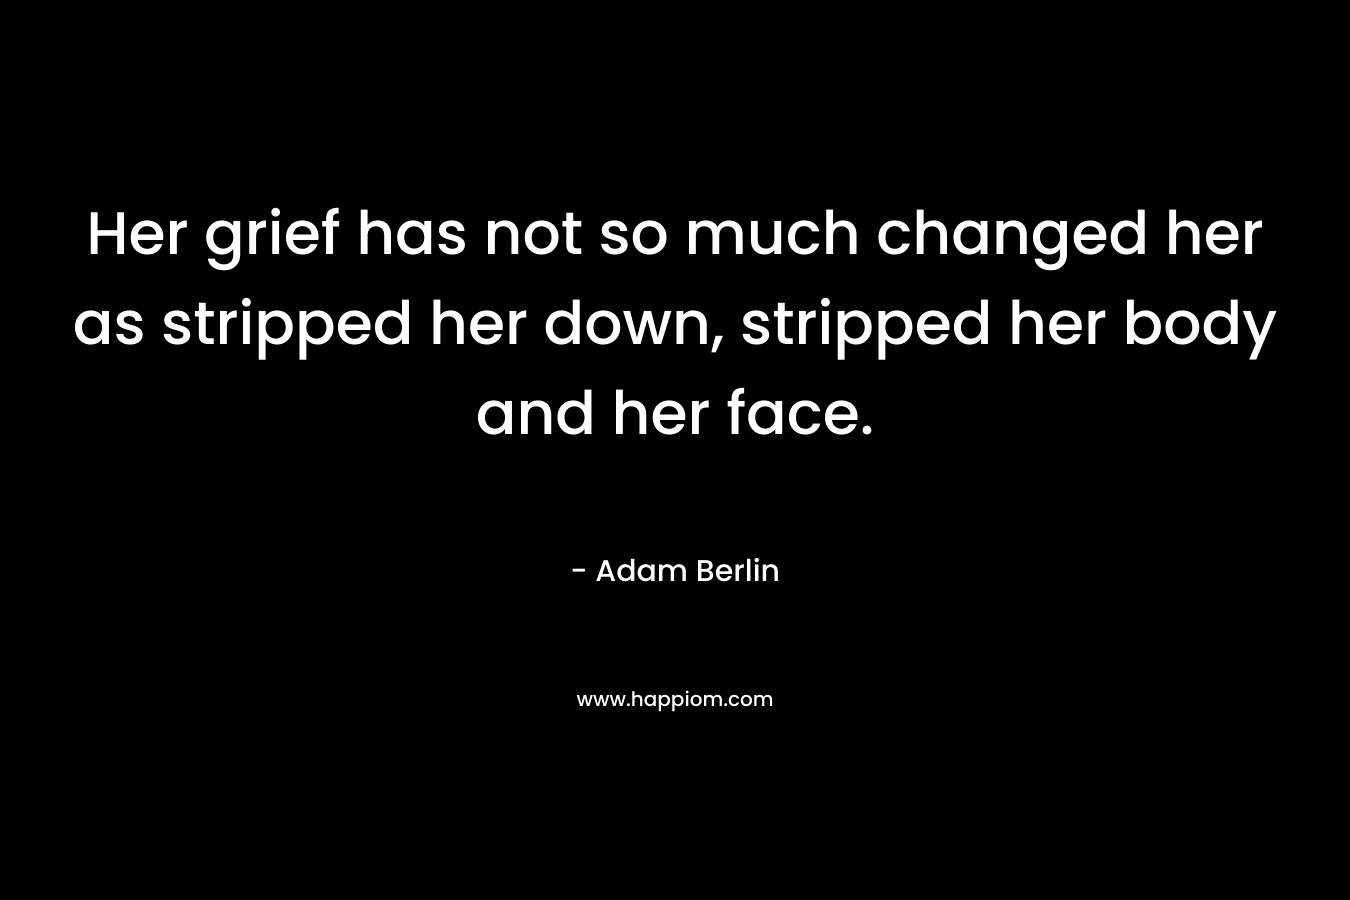 Her grief has not so much changed her as stripped her down, stripped her body and her face. – Adam Berlin